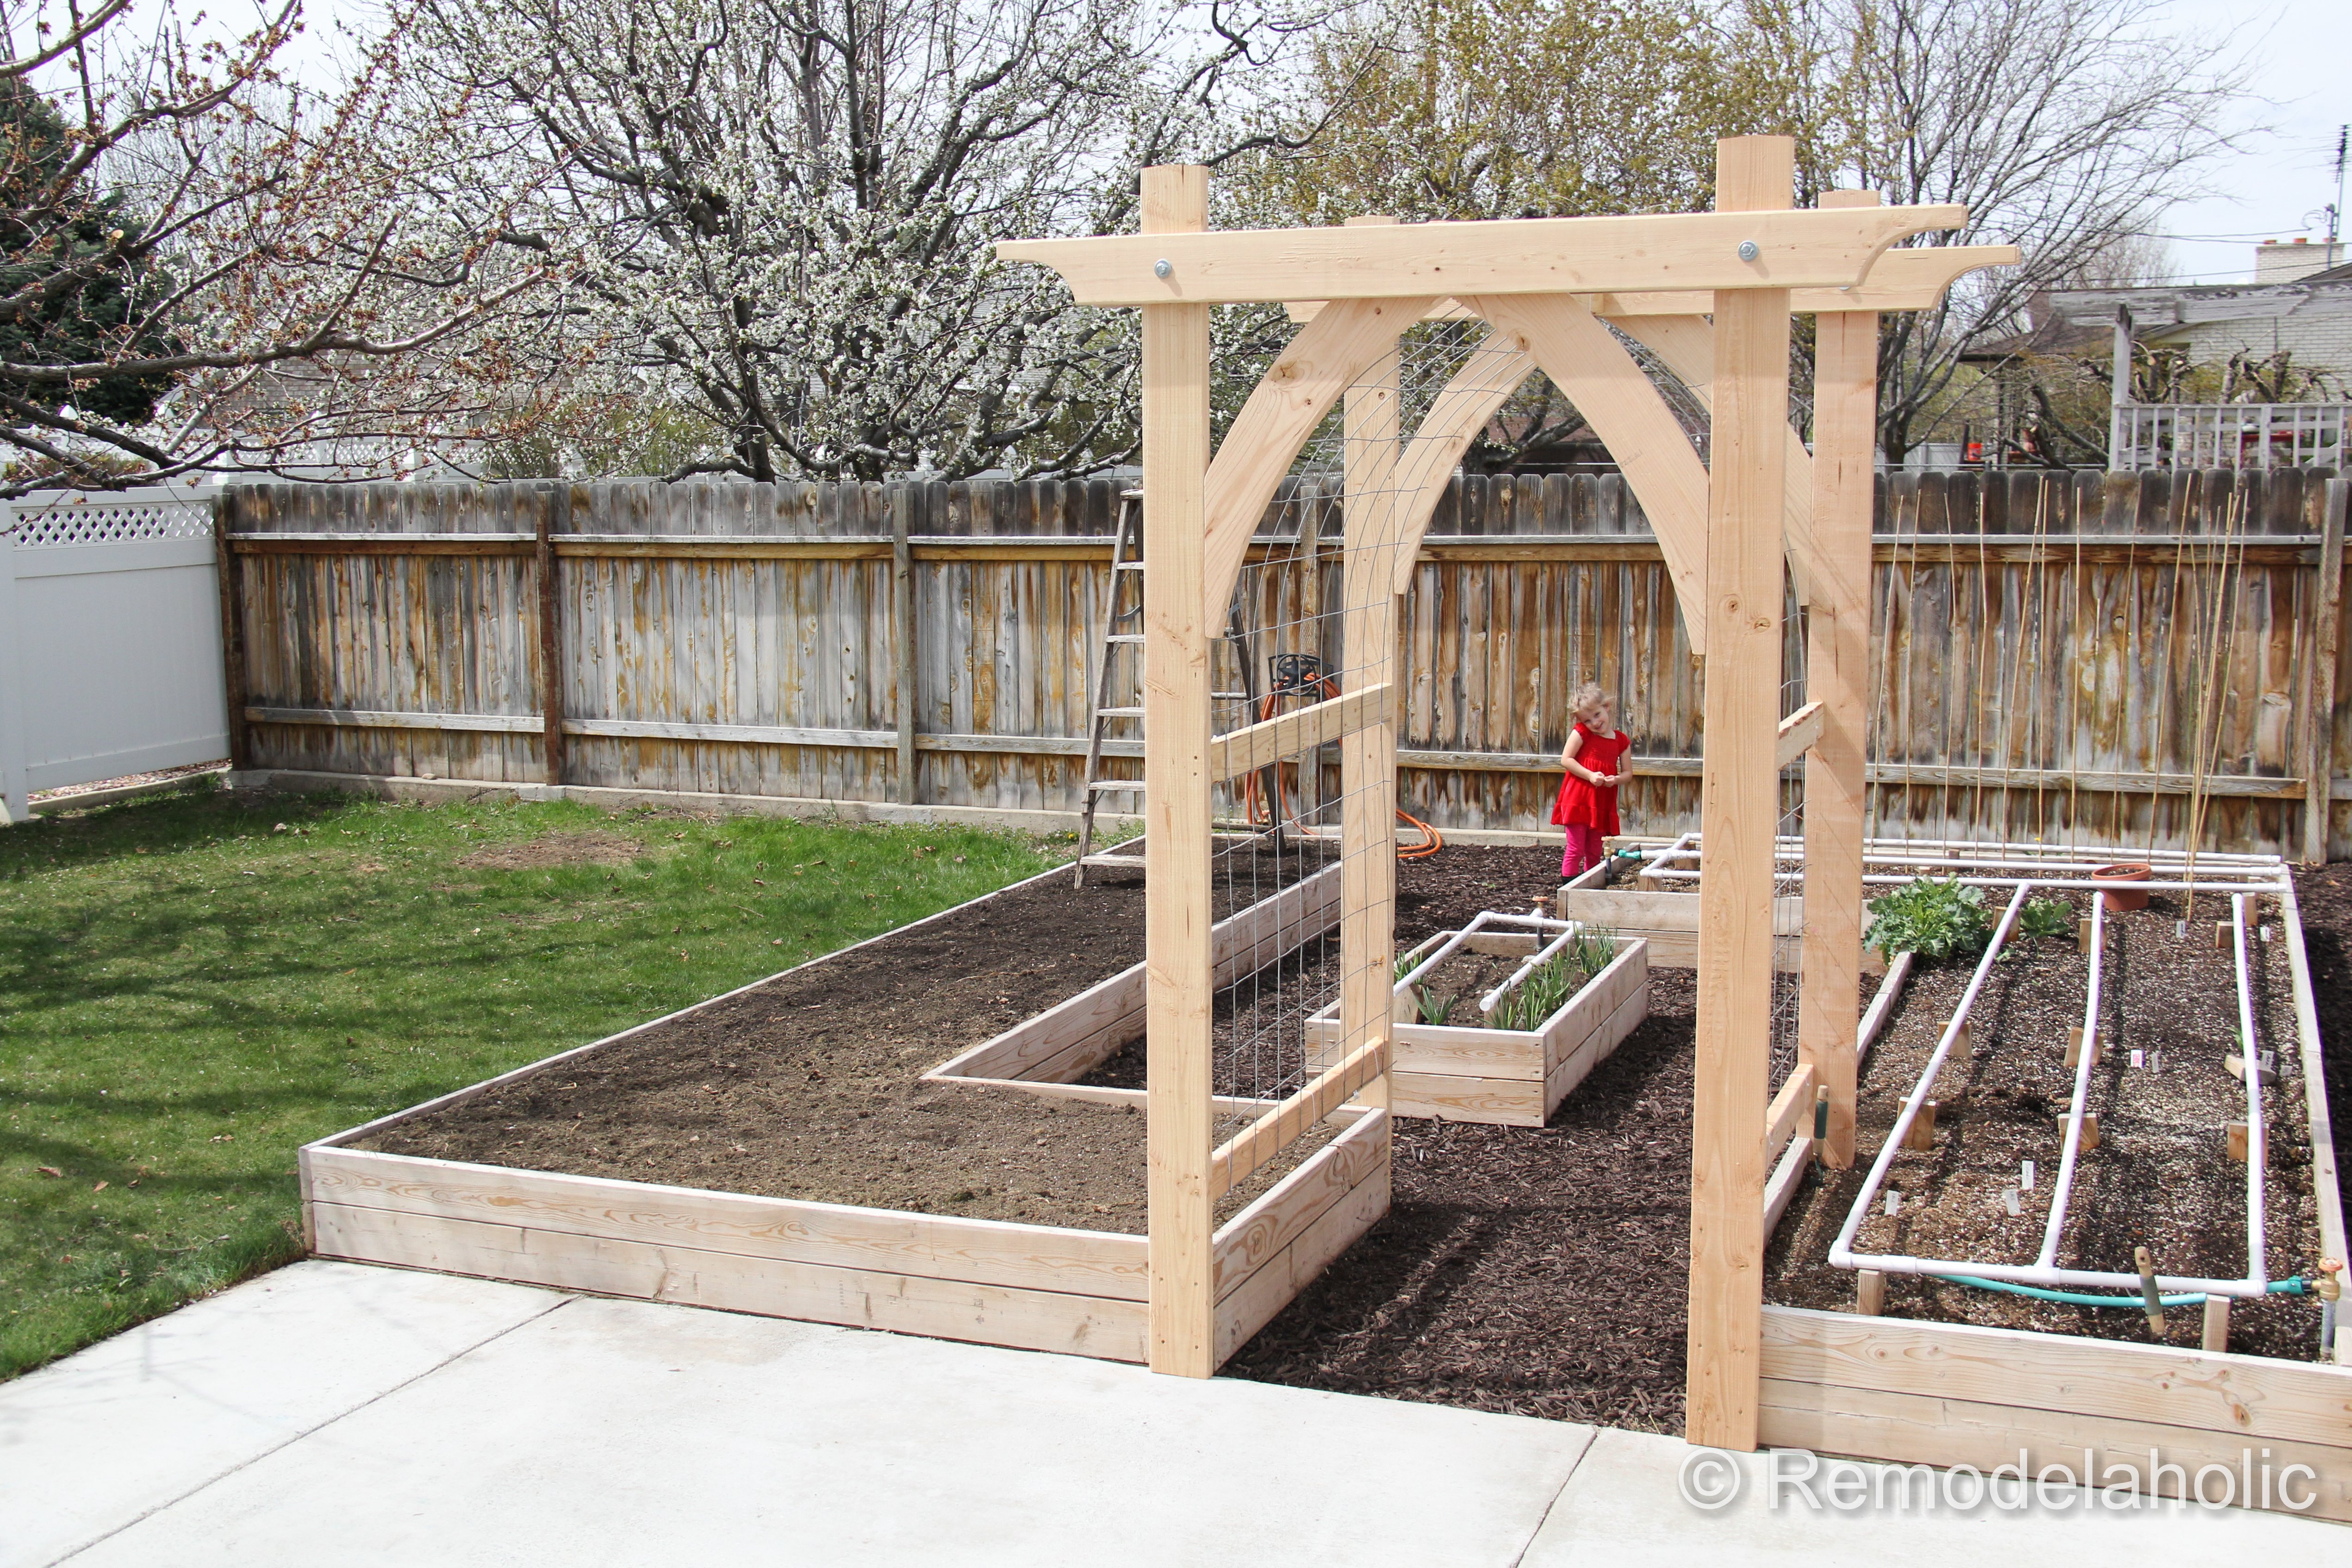 How to Build an Arched DIY Garden Arbor and Plant Trellis – Woodworking Plans